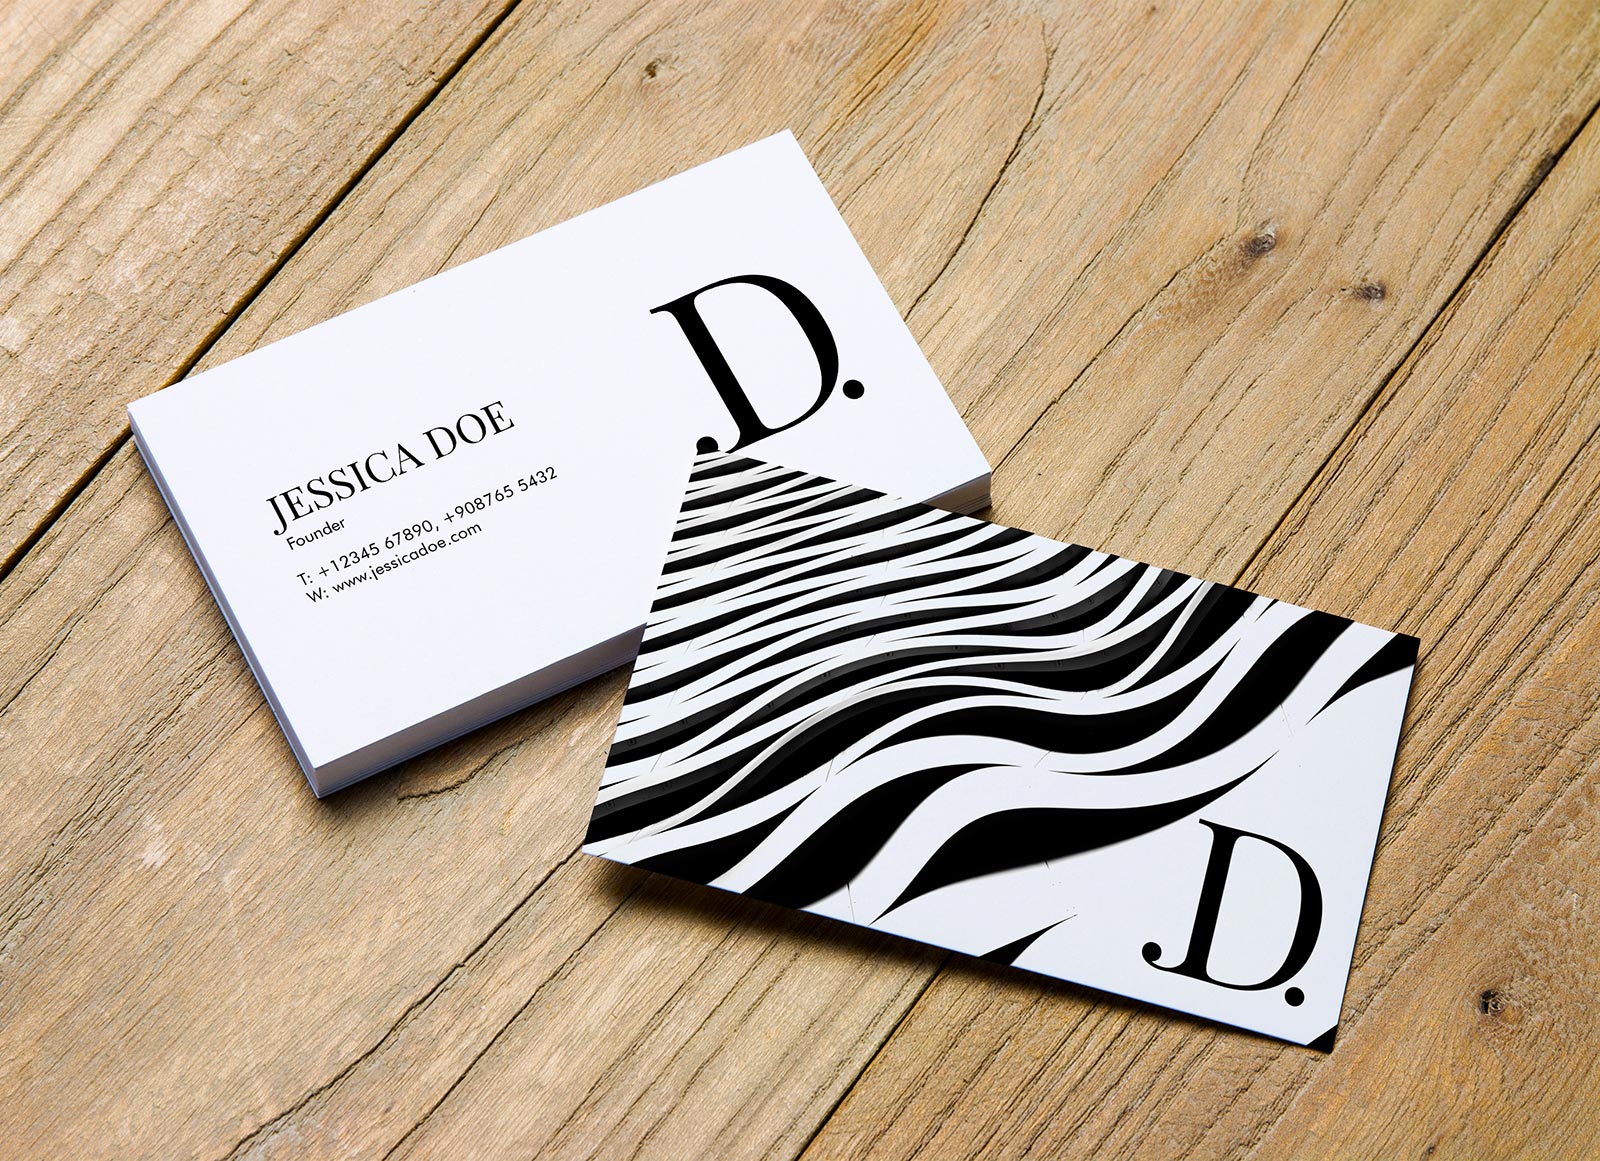 business card mockup photoshop free download